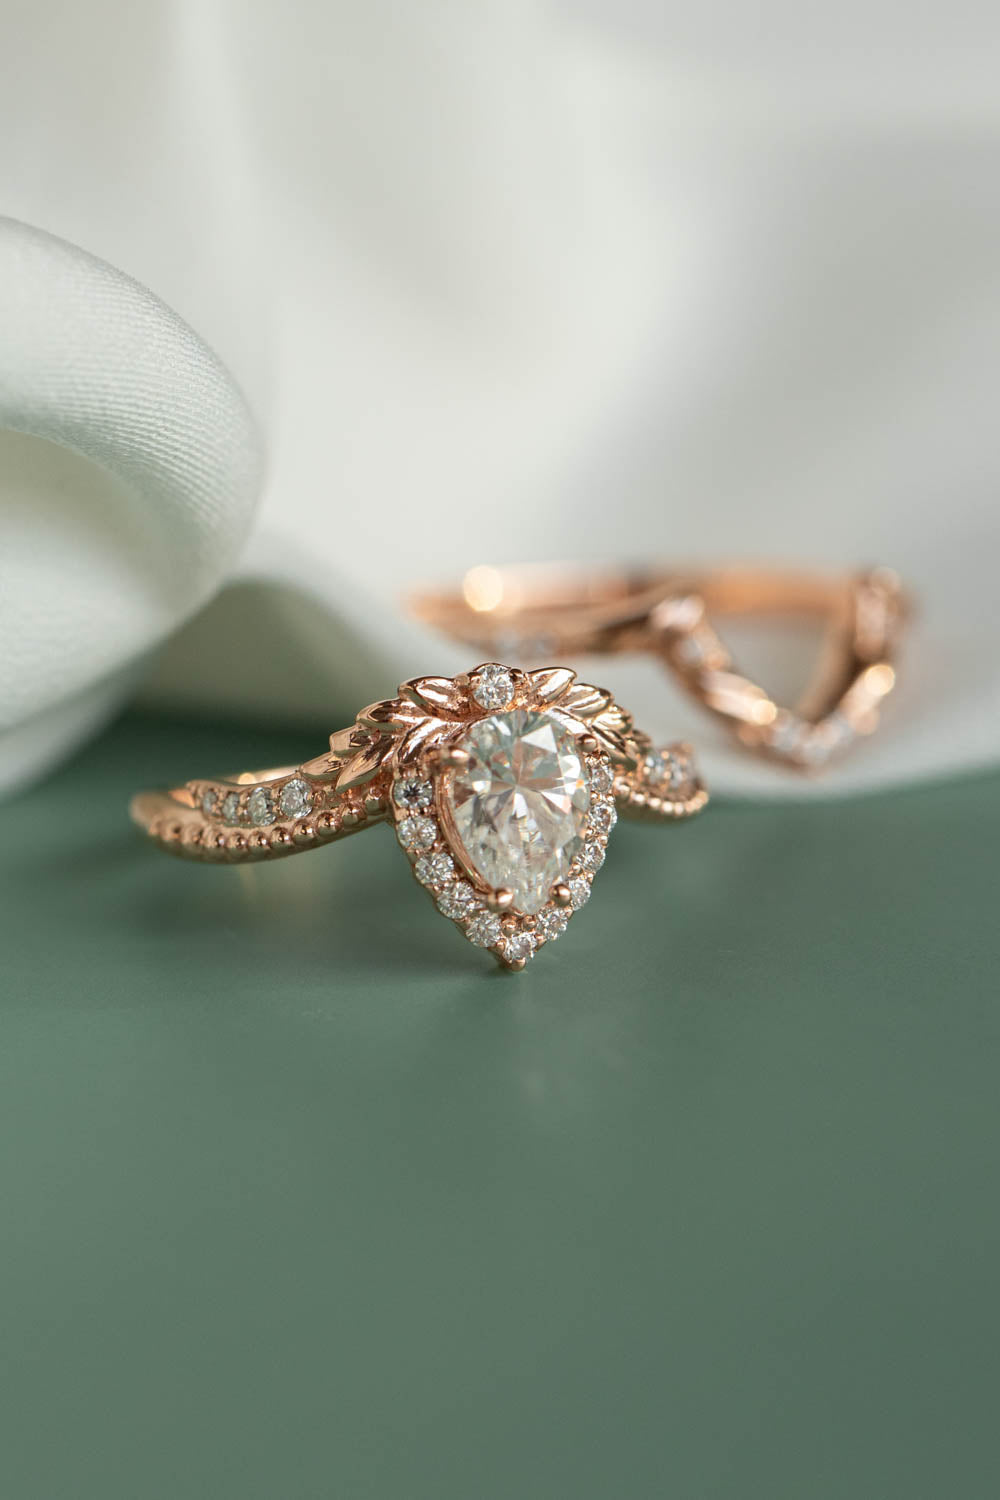 antique style gold engagement rings